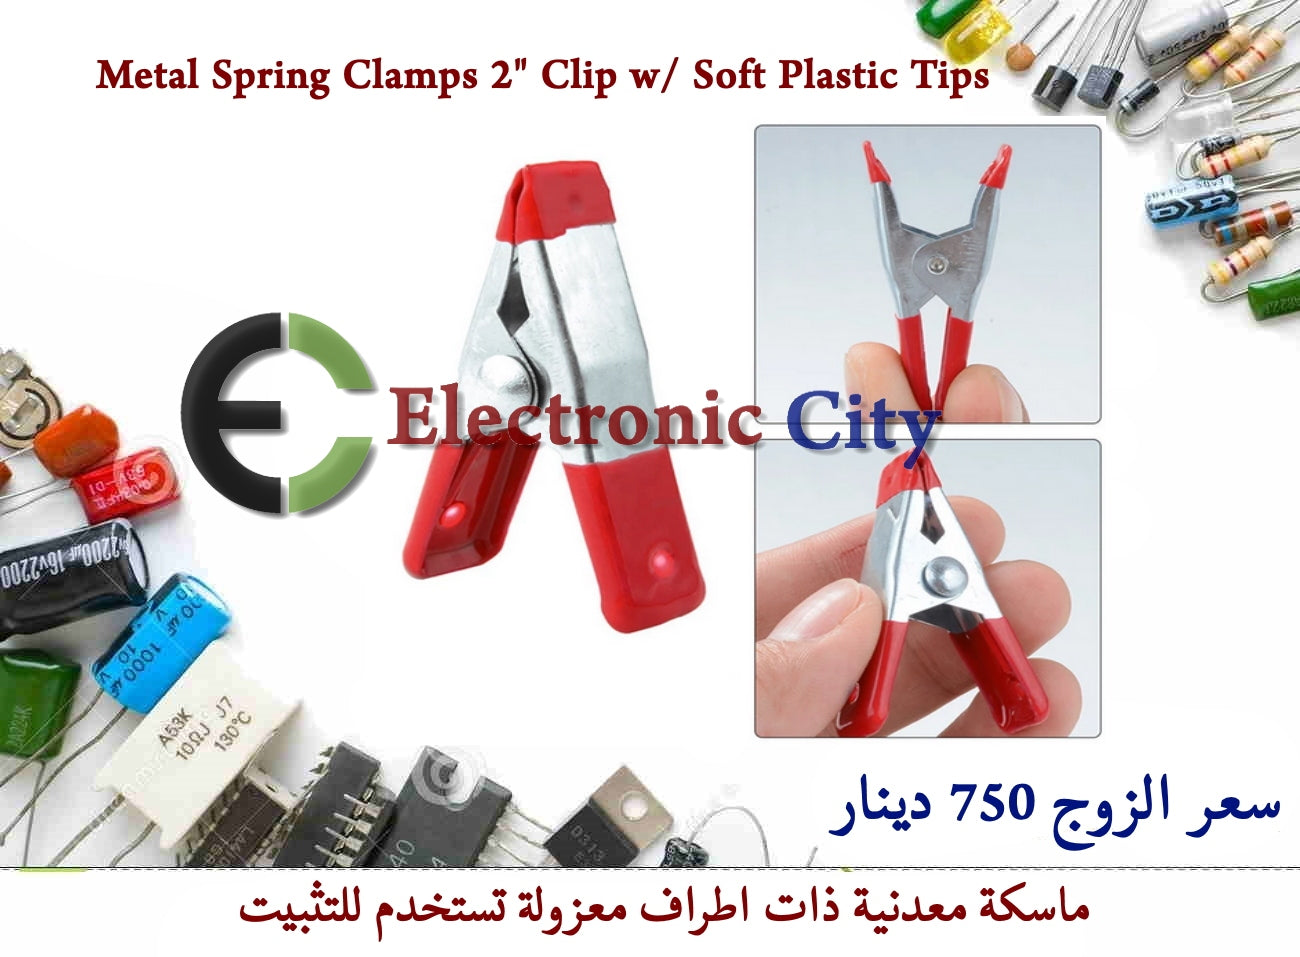 Metal Spring Clamps 2inch Clip Soft Plastic Tips